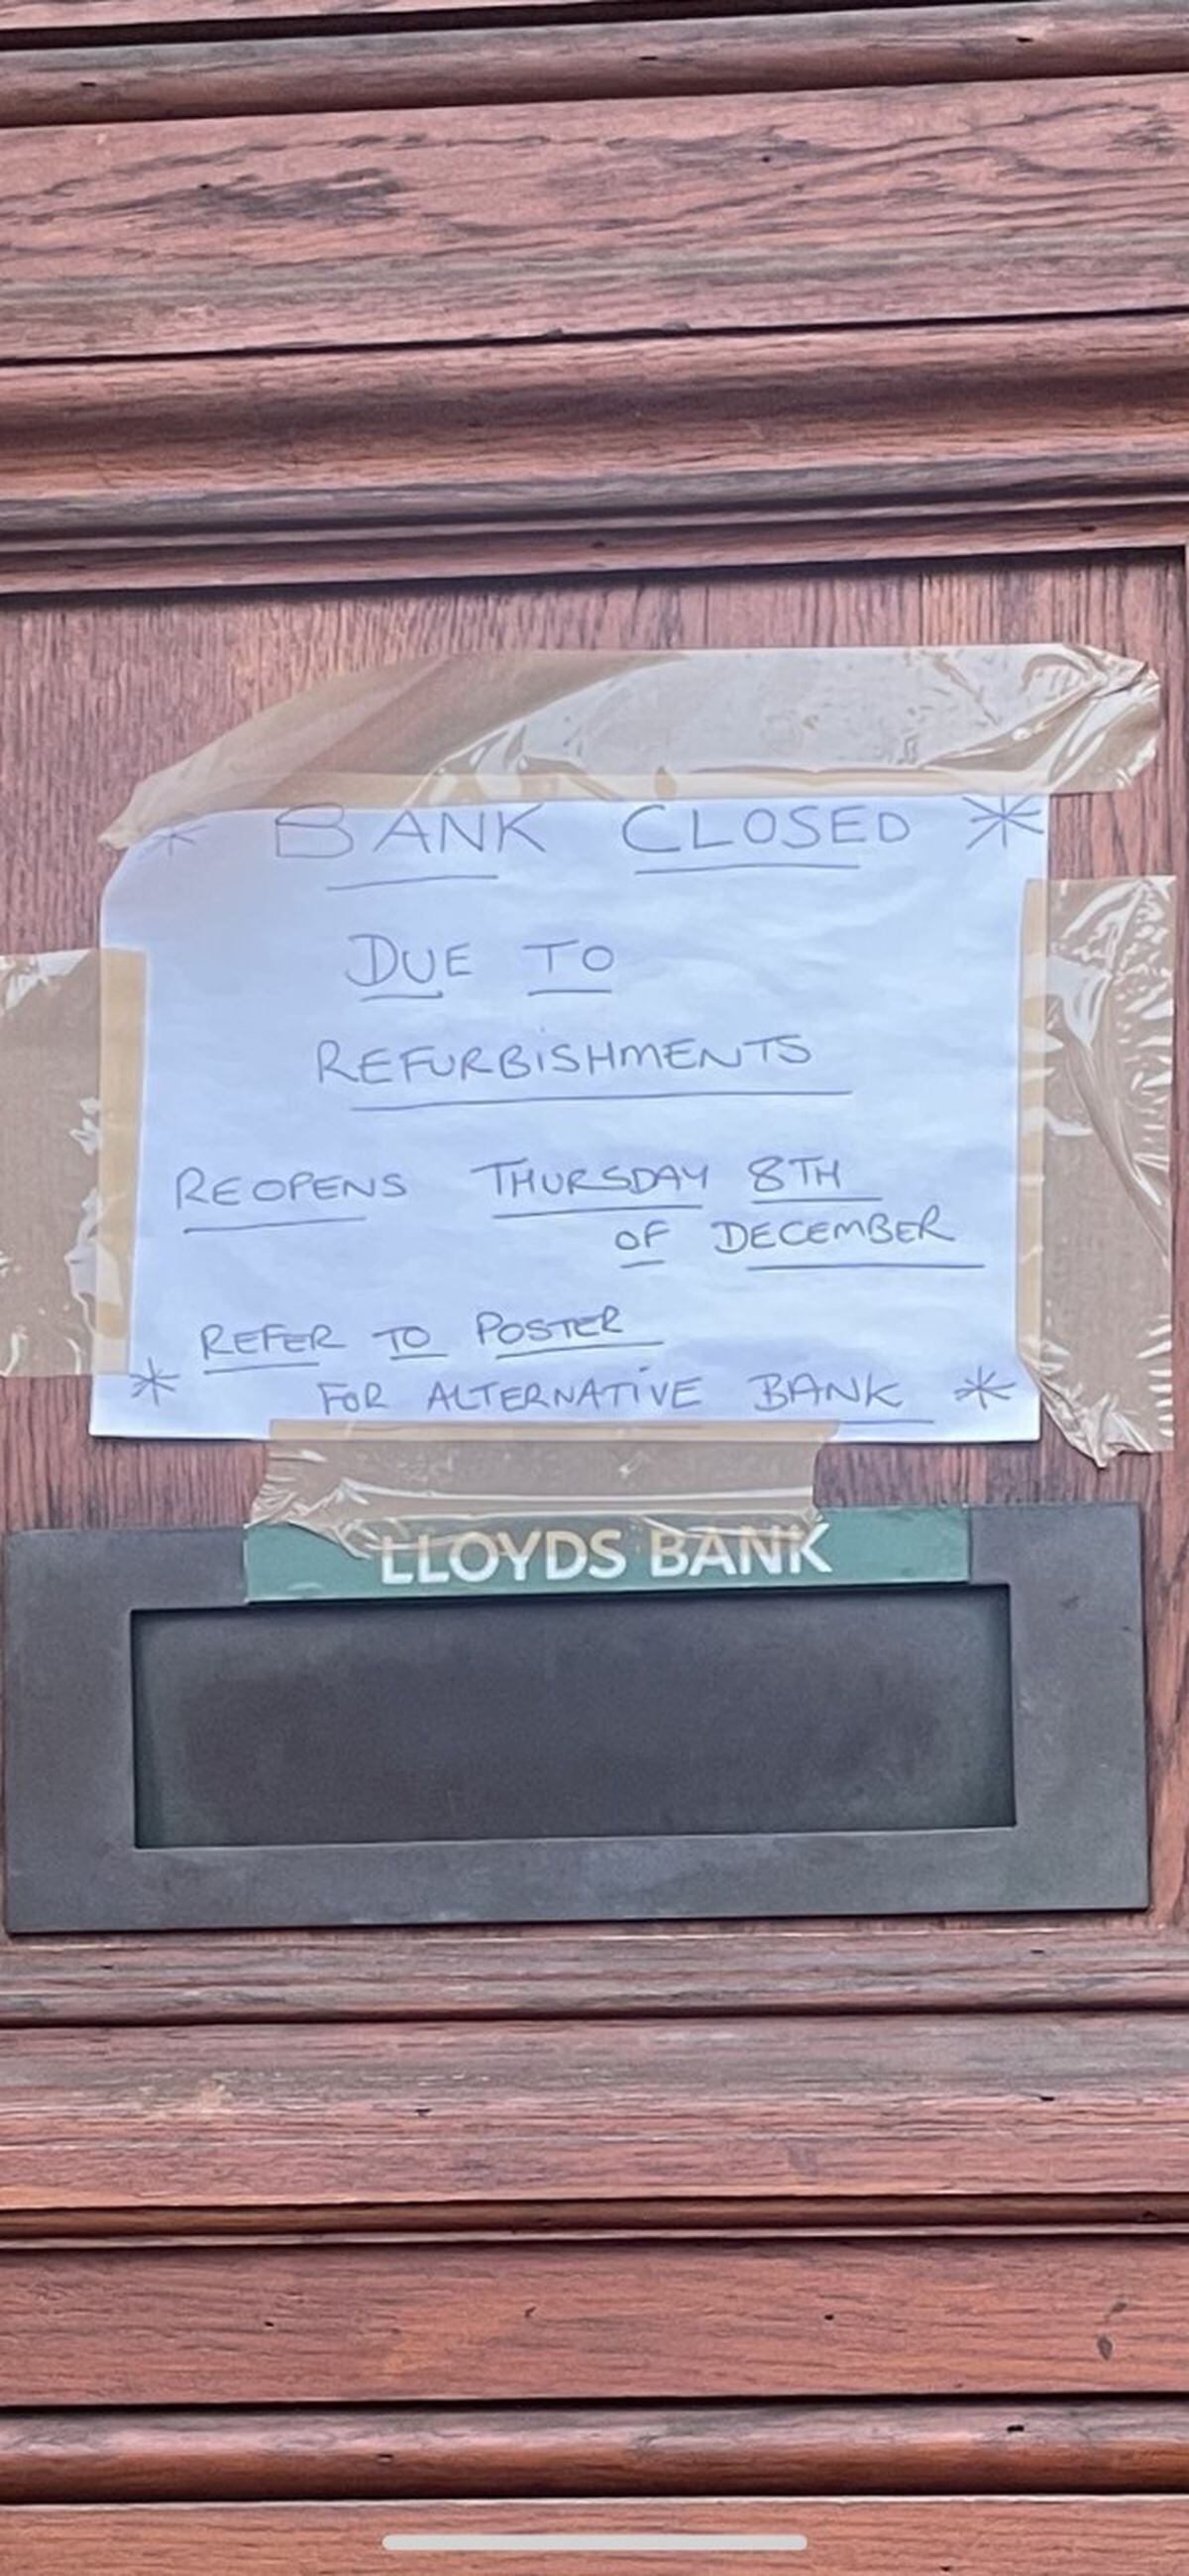 The sign posted on the door of the city centre branch